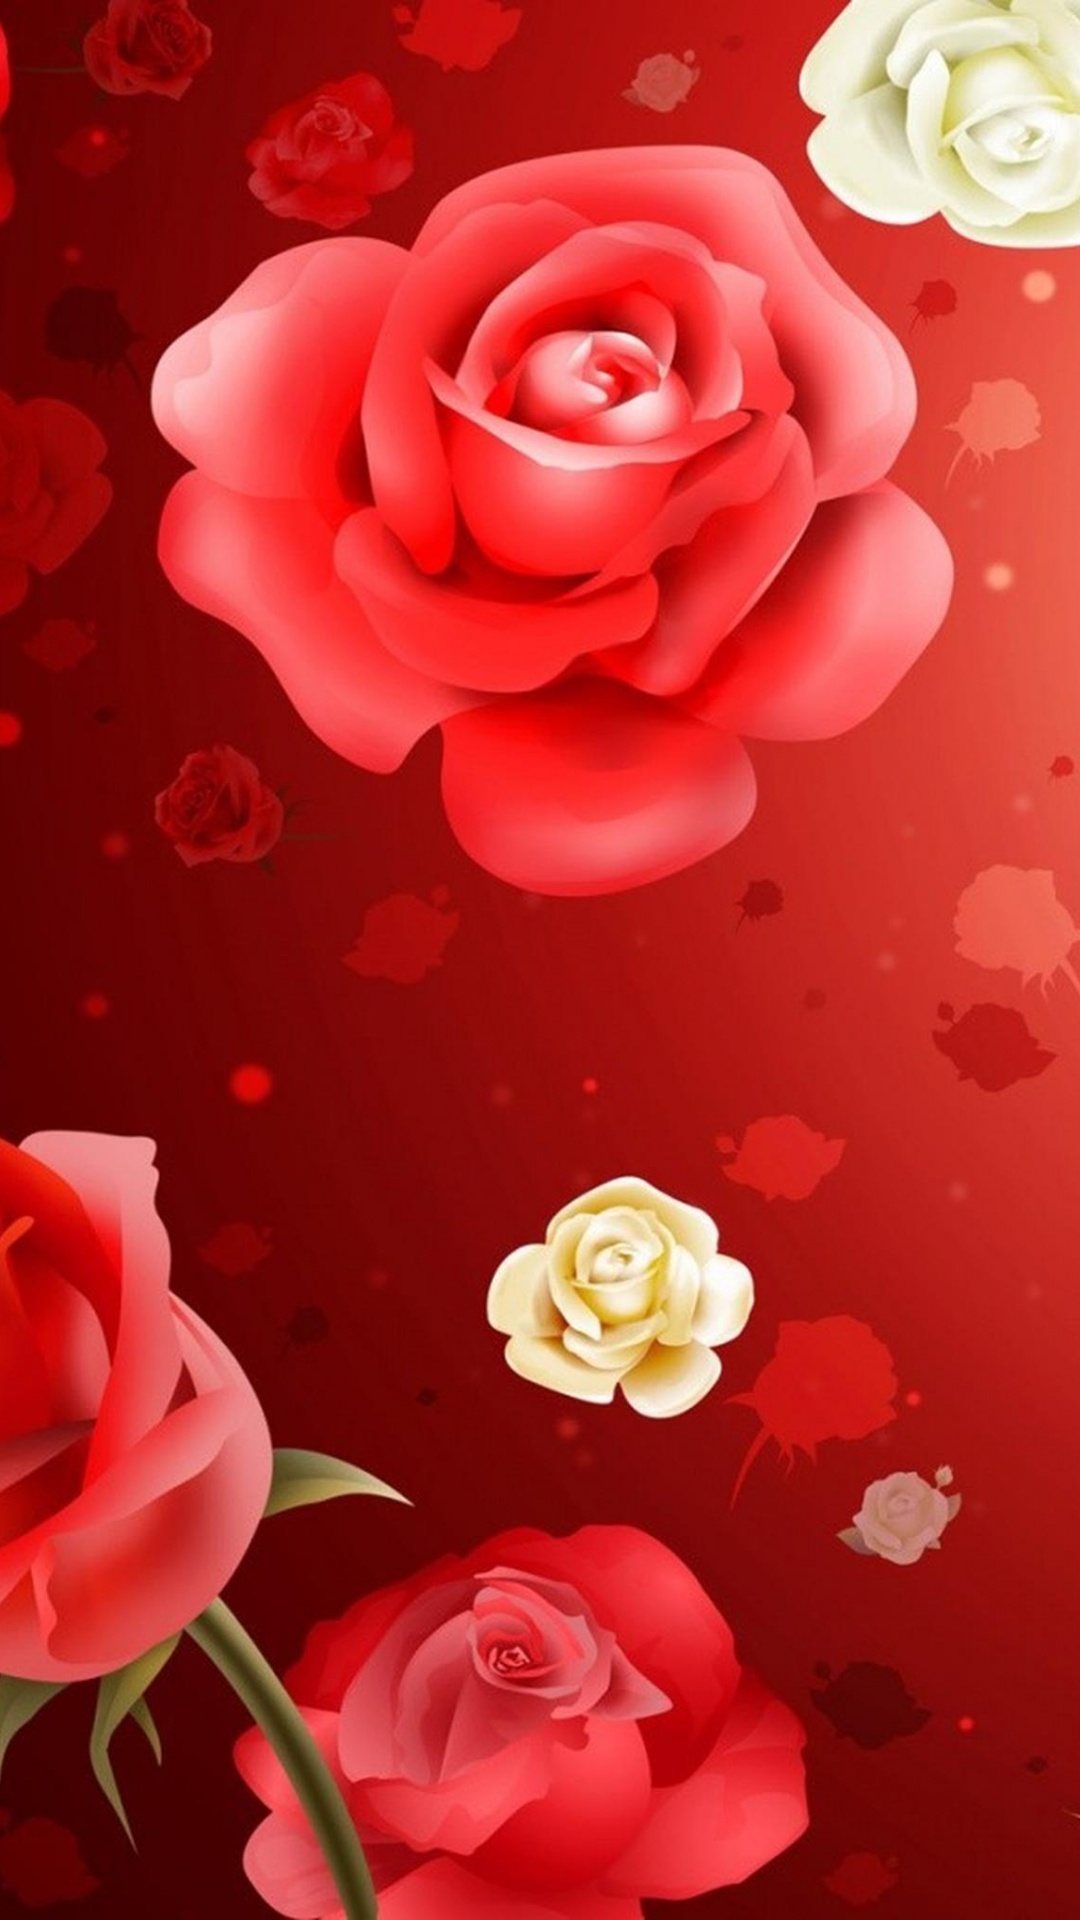 White and Pink Roses on Red Surface. Wallpaper in 1080x1920 Resolution